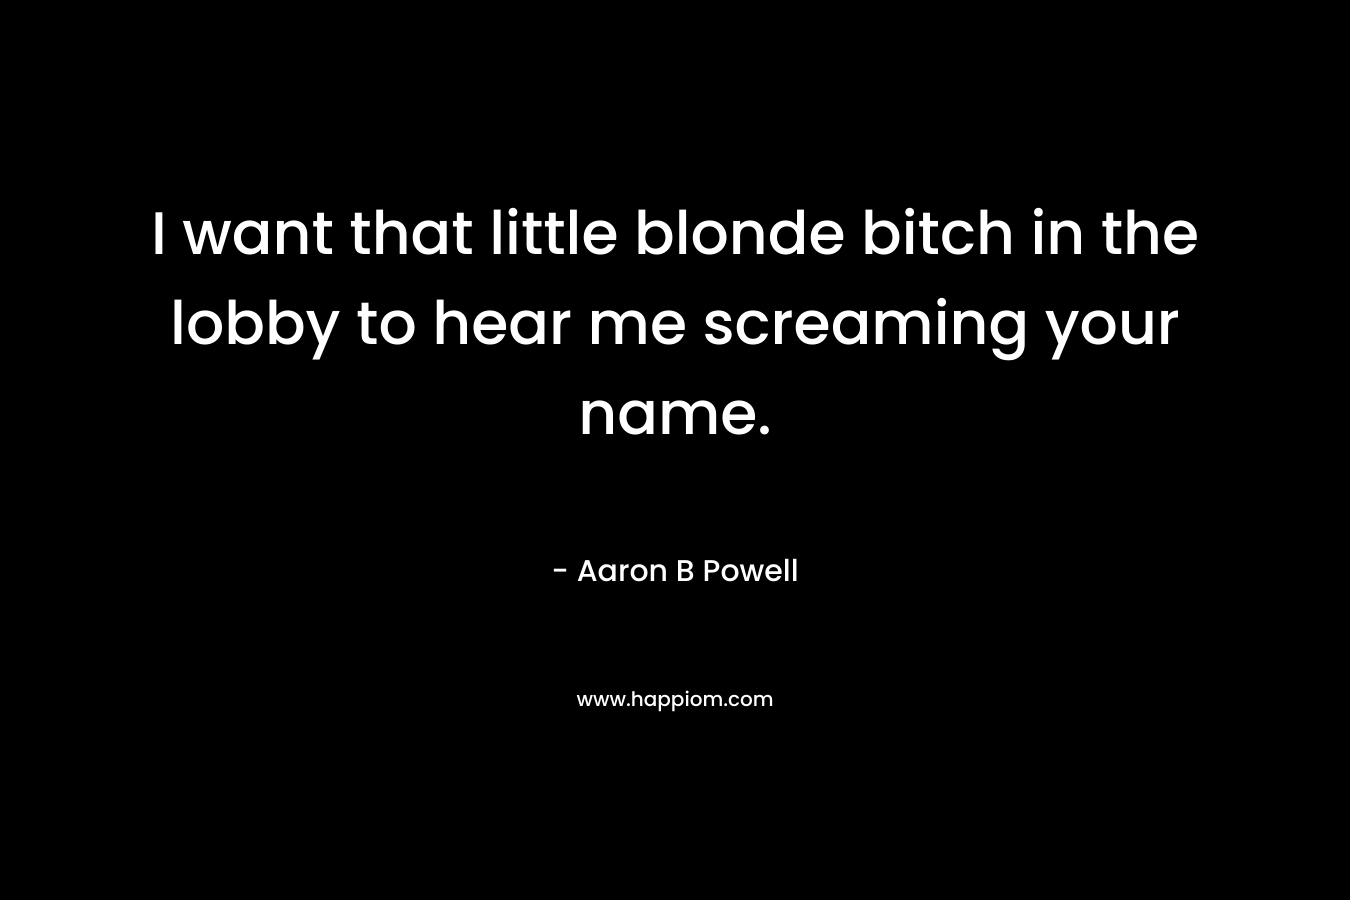 I want that little blonde bitch in the lobby to hear me screaming your name. – Aaron B Powell